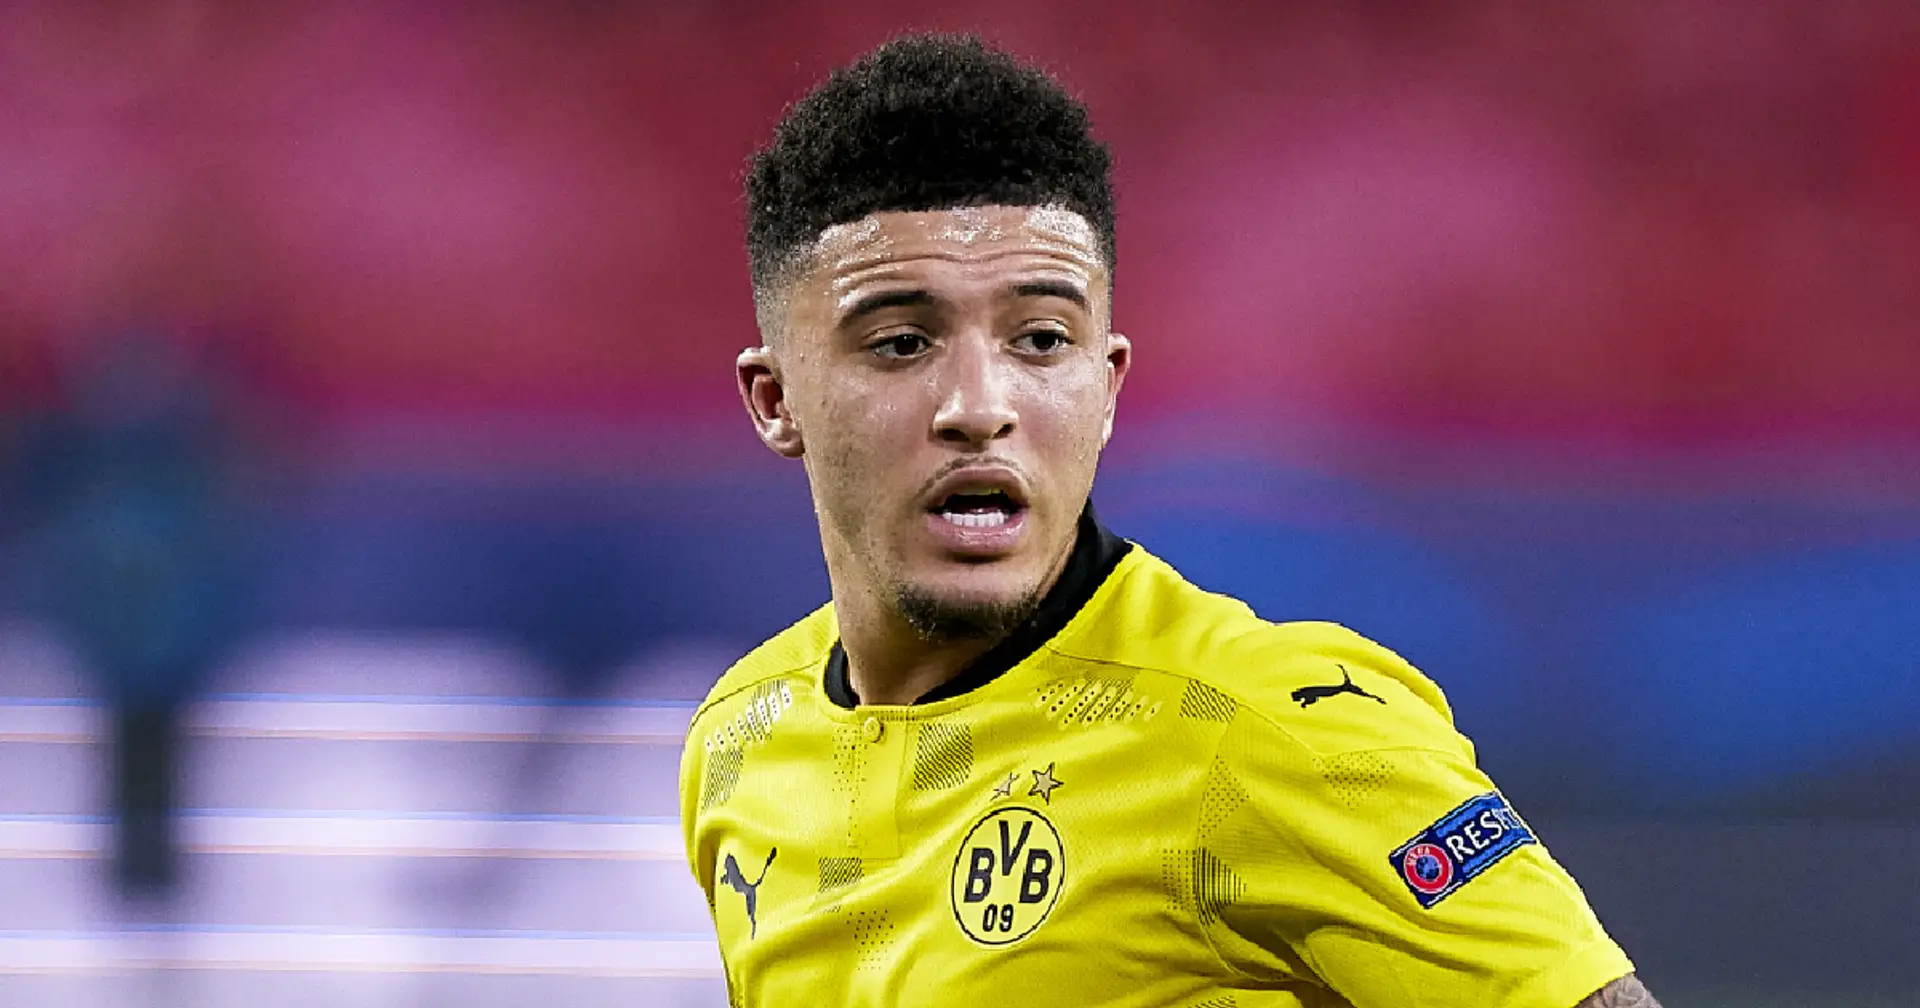 Man United reach agreement with Jadon Sancho's camp, terms of contract revealed (reliability: 5 stars)